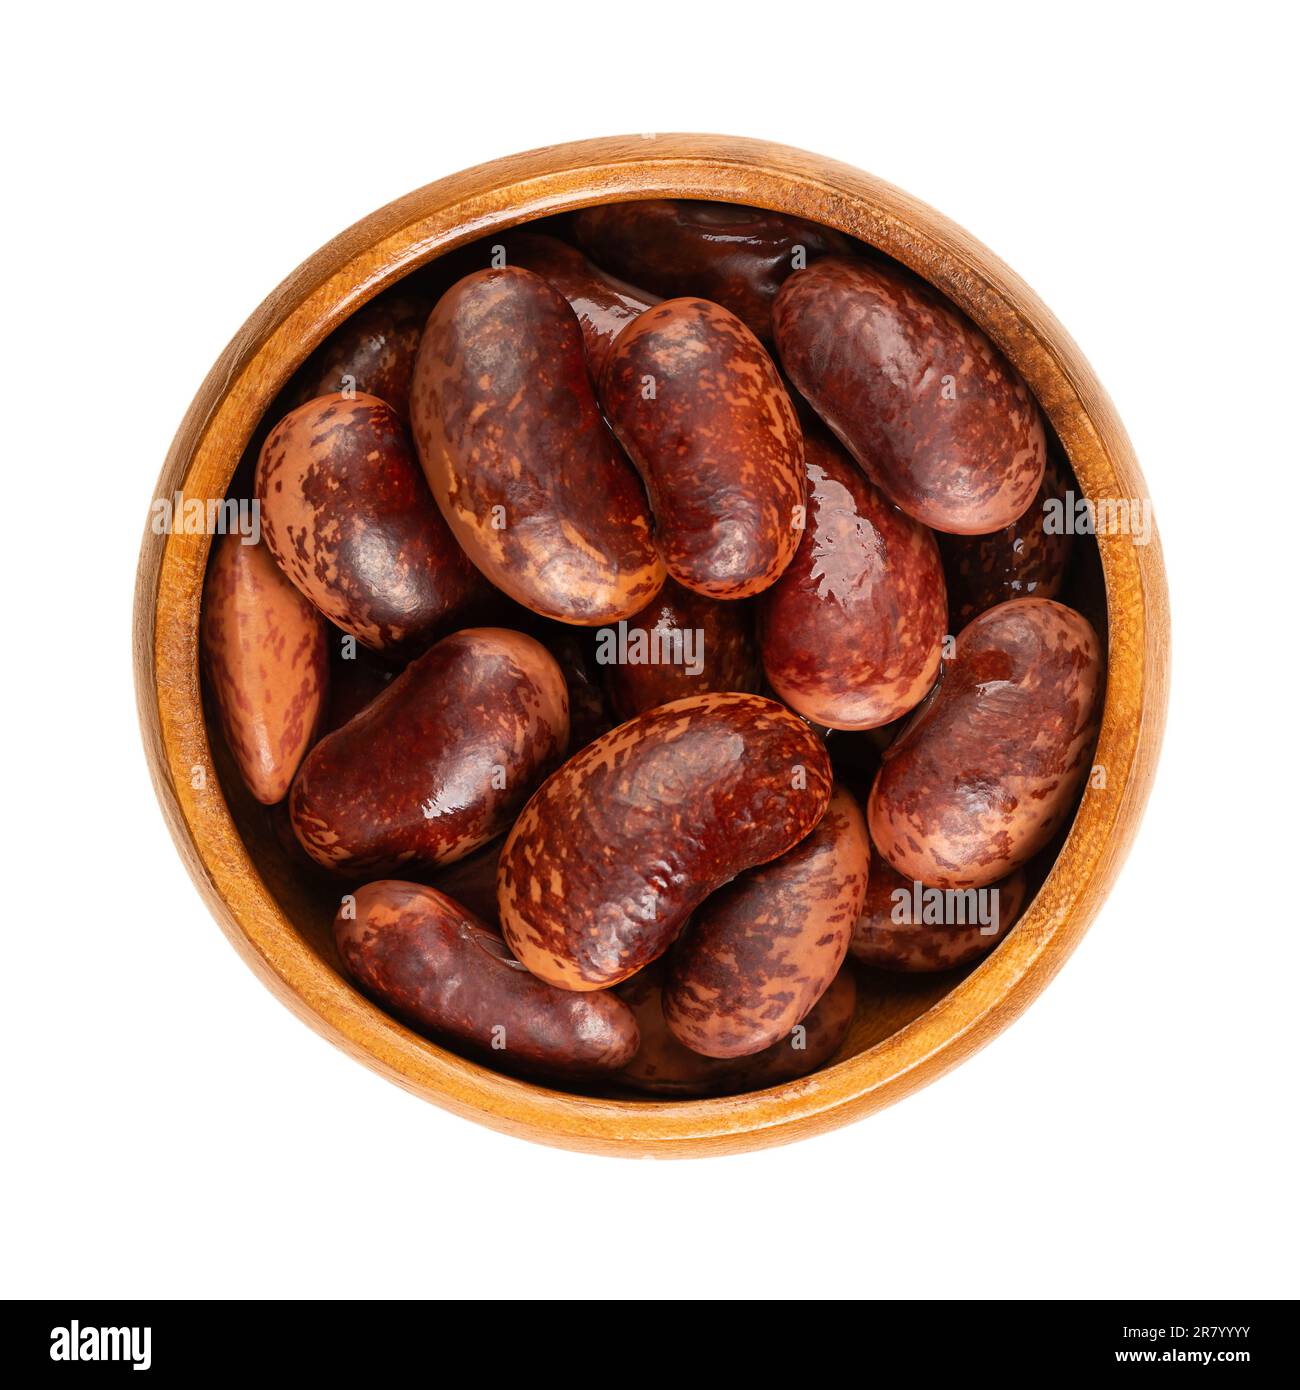 Scarlet Runner beans in a wooden bowl. Boiled and canned runner beans, seeds of Phaseolus coccineus, also known as multiflora or butter bean. Stock Photo